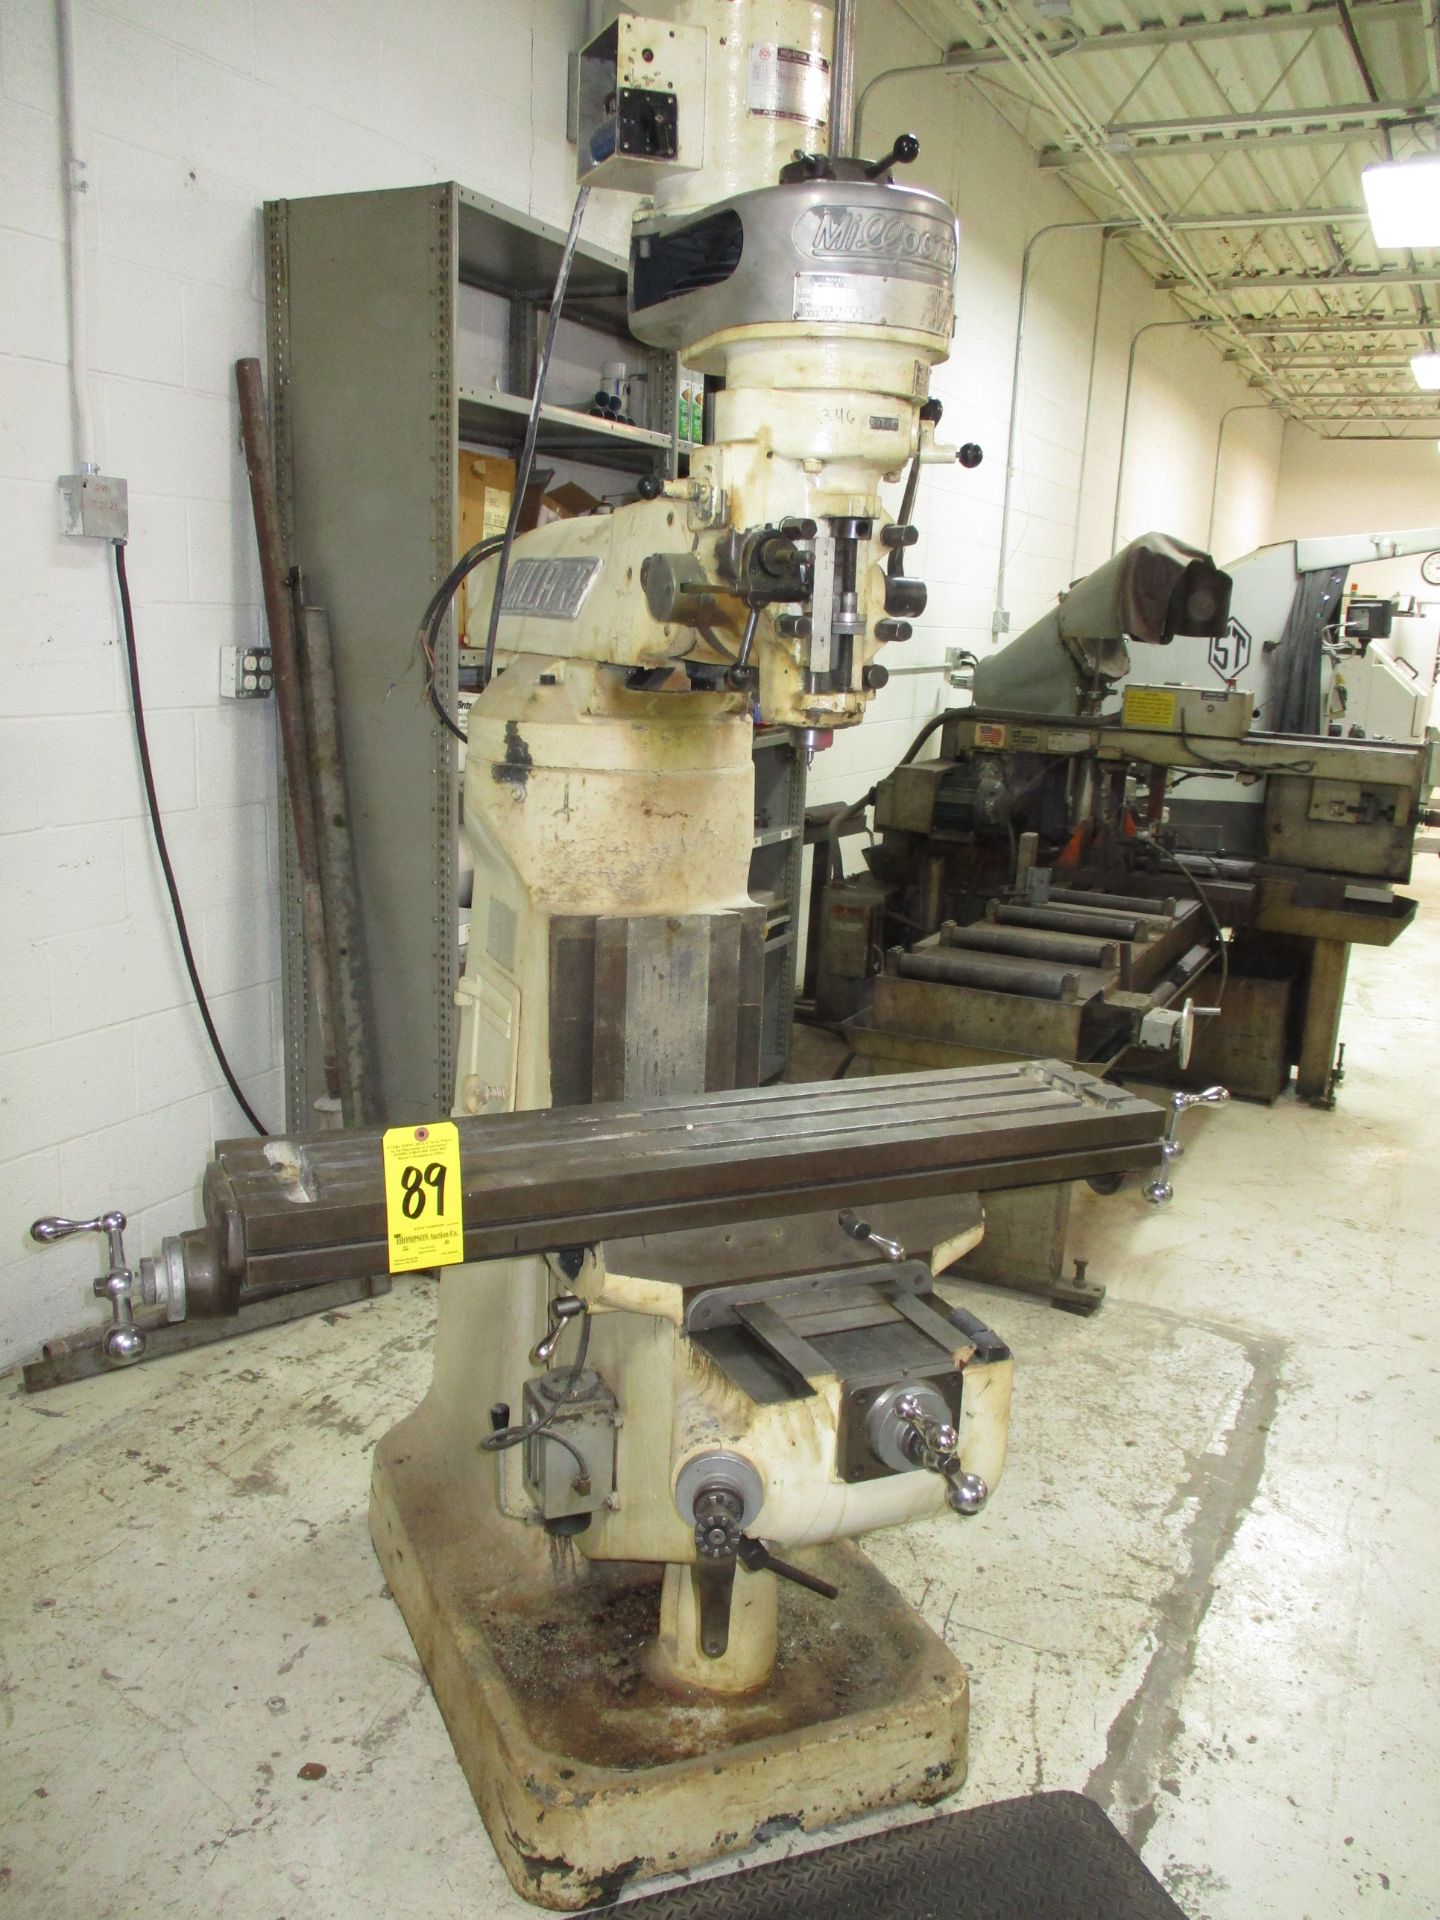 Millport Model 2S Step Pulley Vertical Mill, SN 84886, 9" x 42" Table, R-8 Spindle, 2 HP